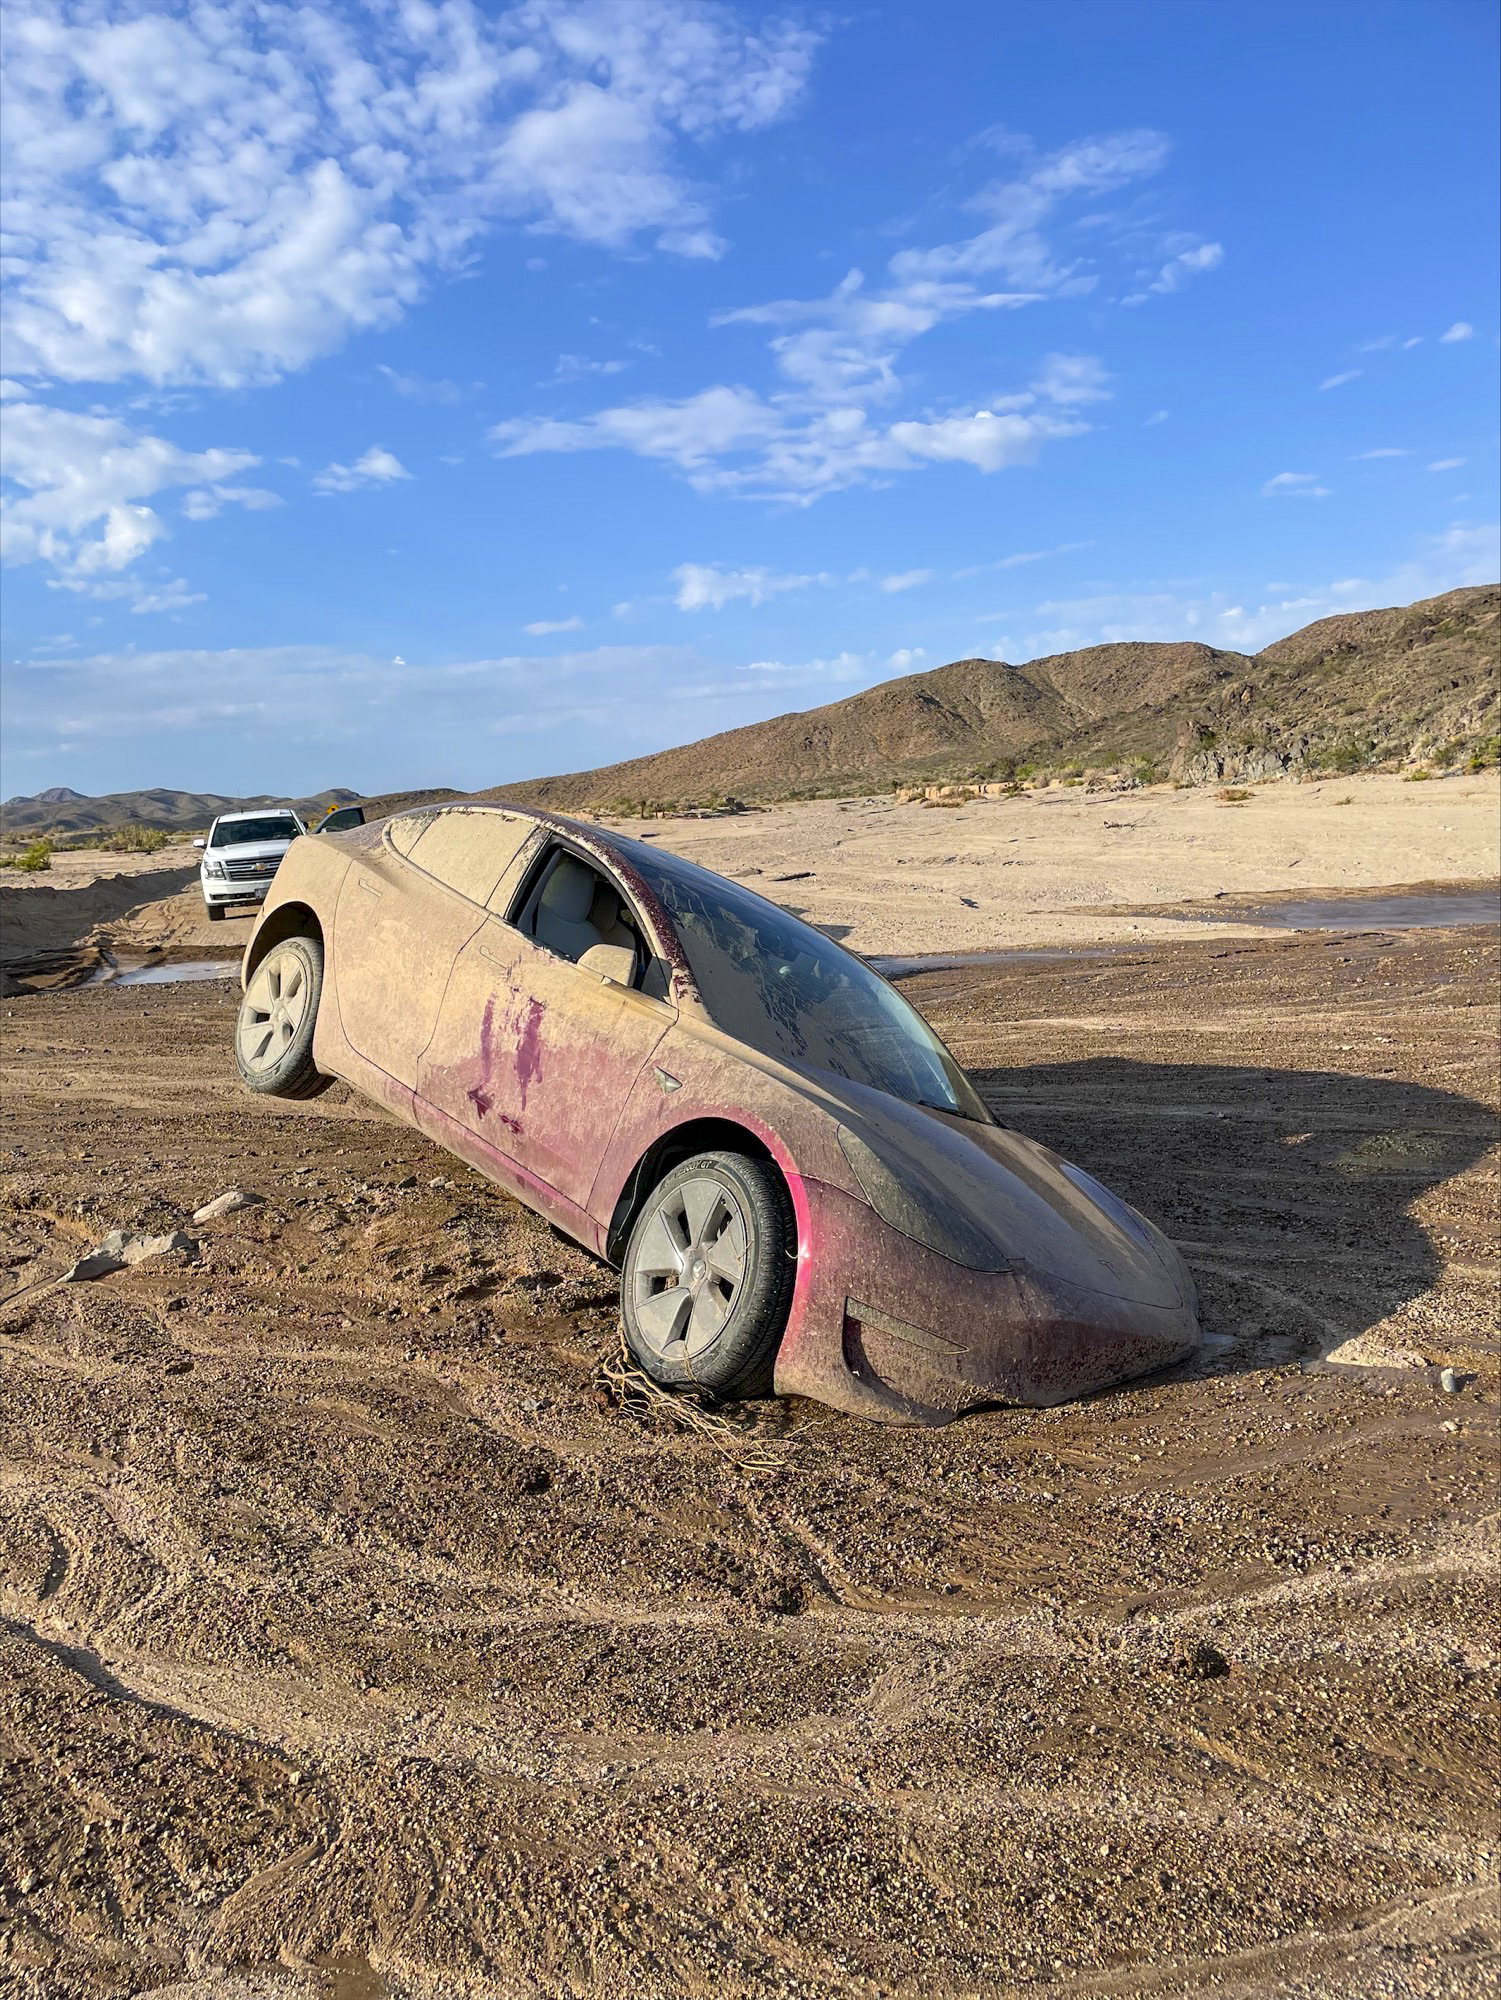 A red Tesla, almost completely covered in dried mud, stuck in a desert wash after recent monsoonal rains. The back passenger tire is in the air.